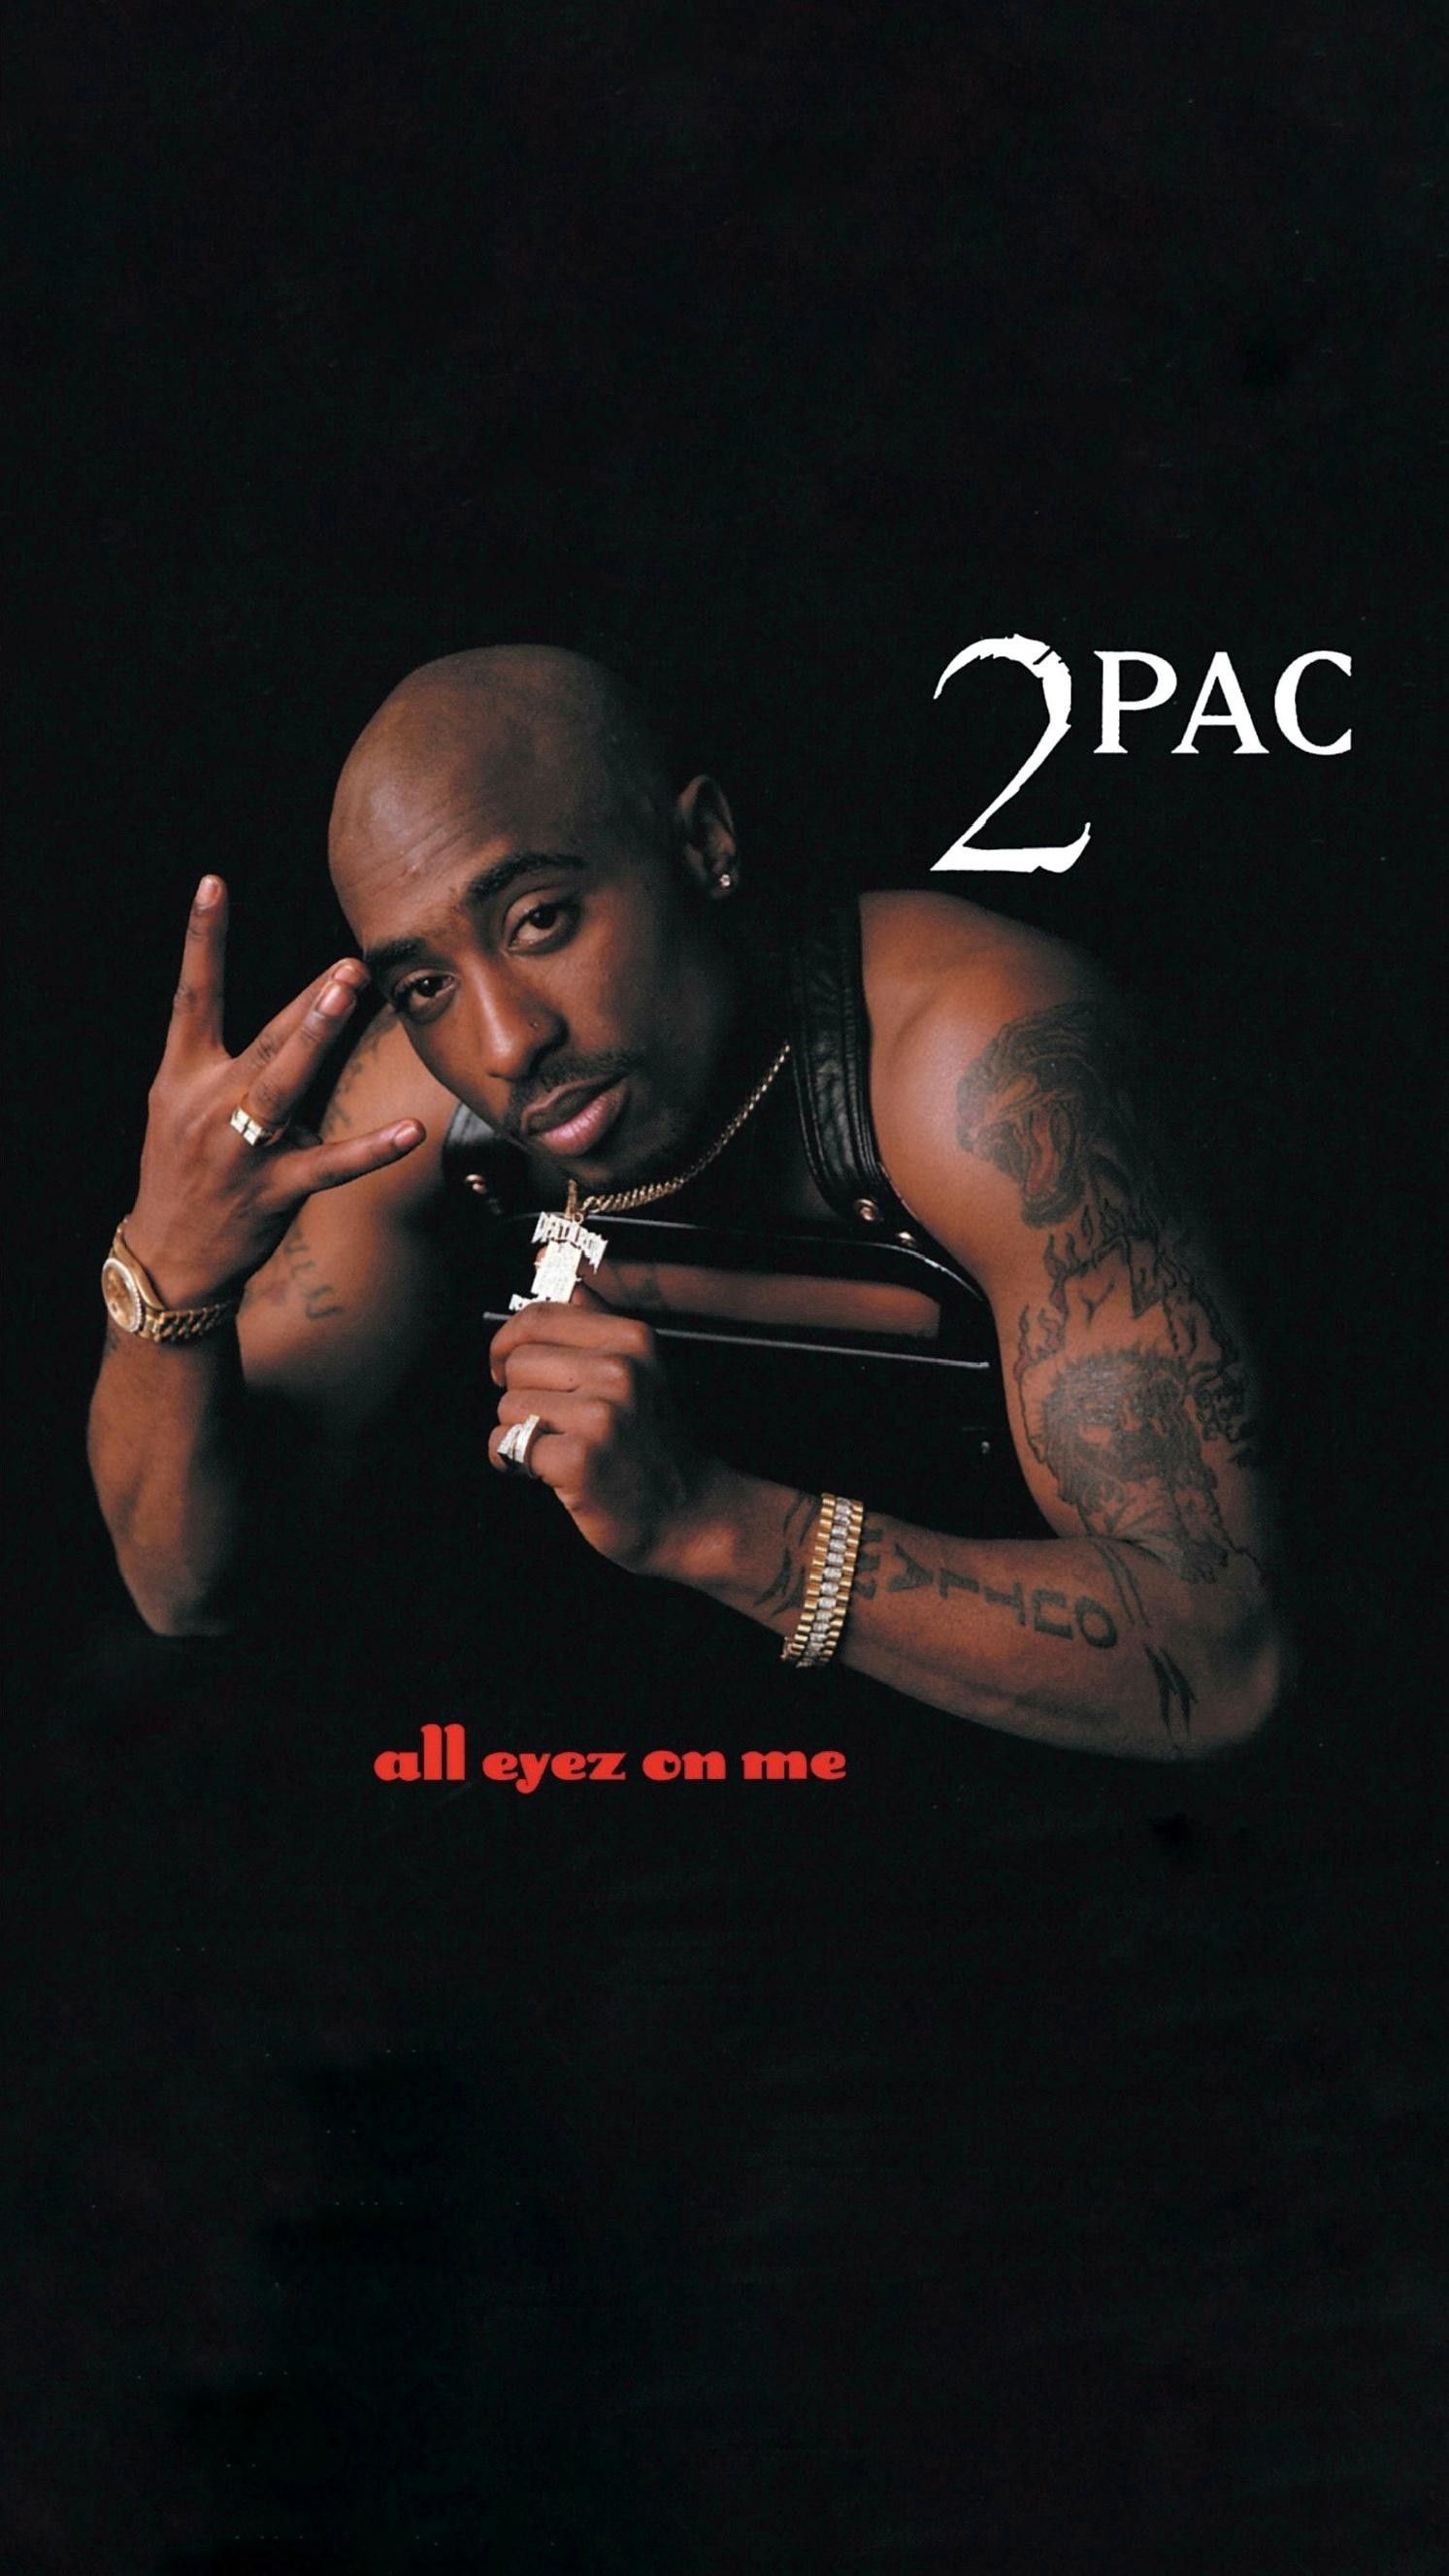 Discover 63+ 2pac wallpaper iphone latest - in.cdgdbentre